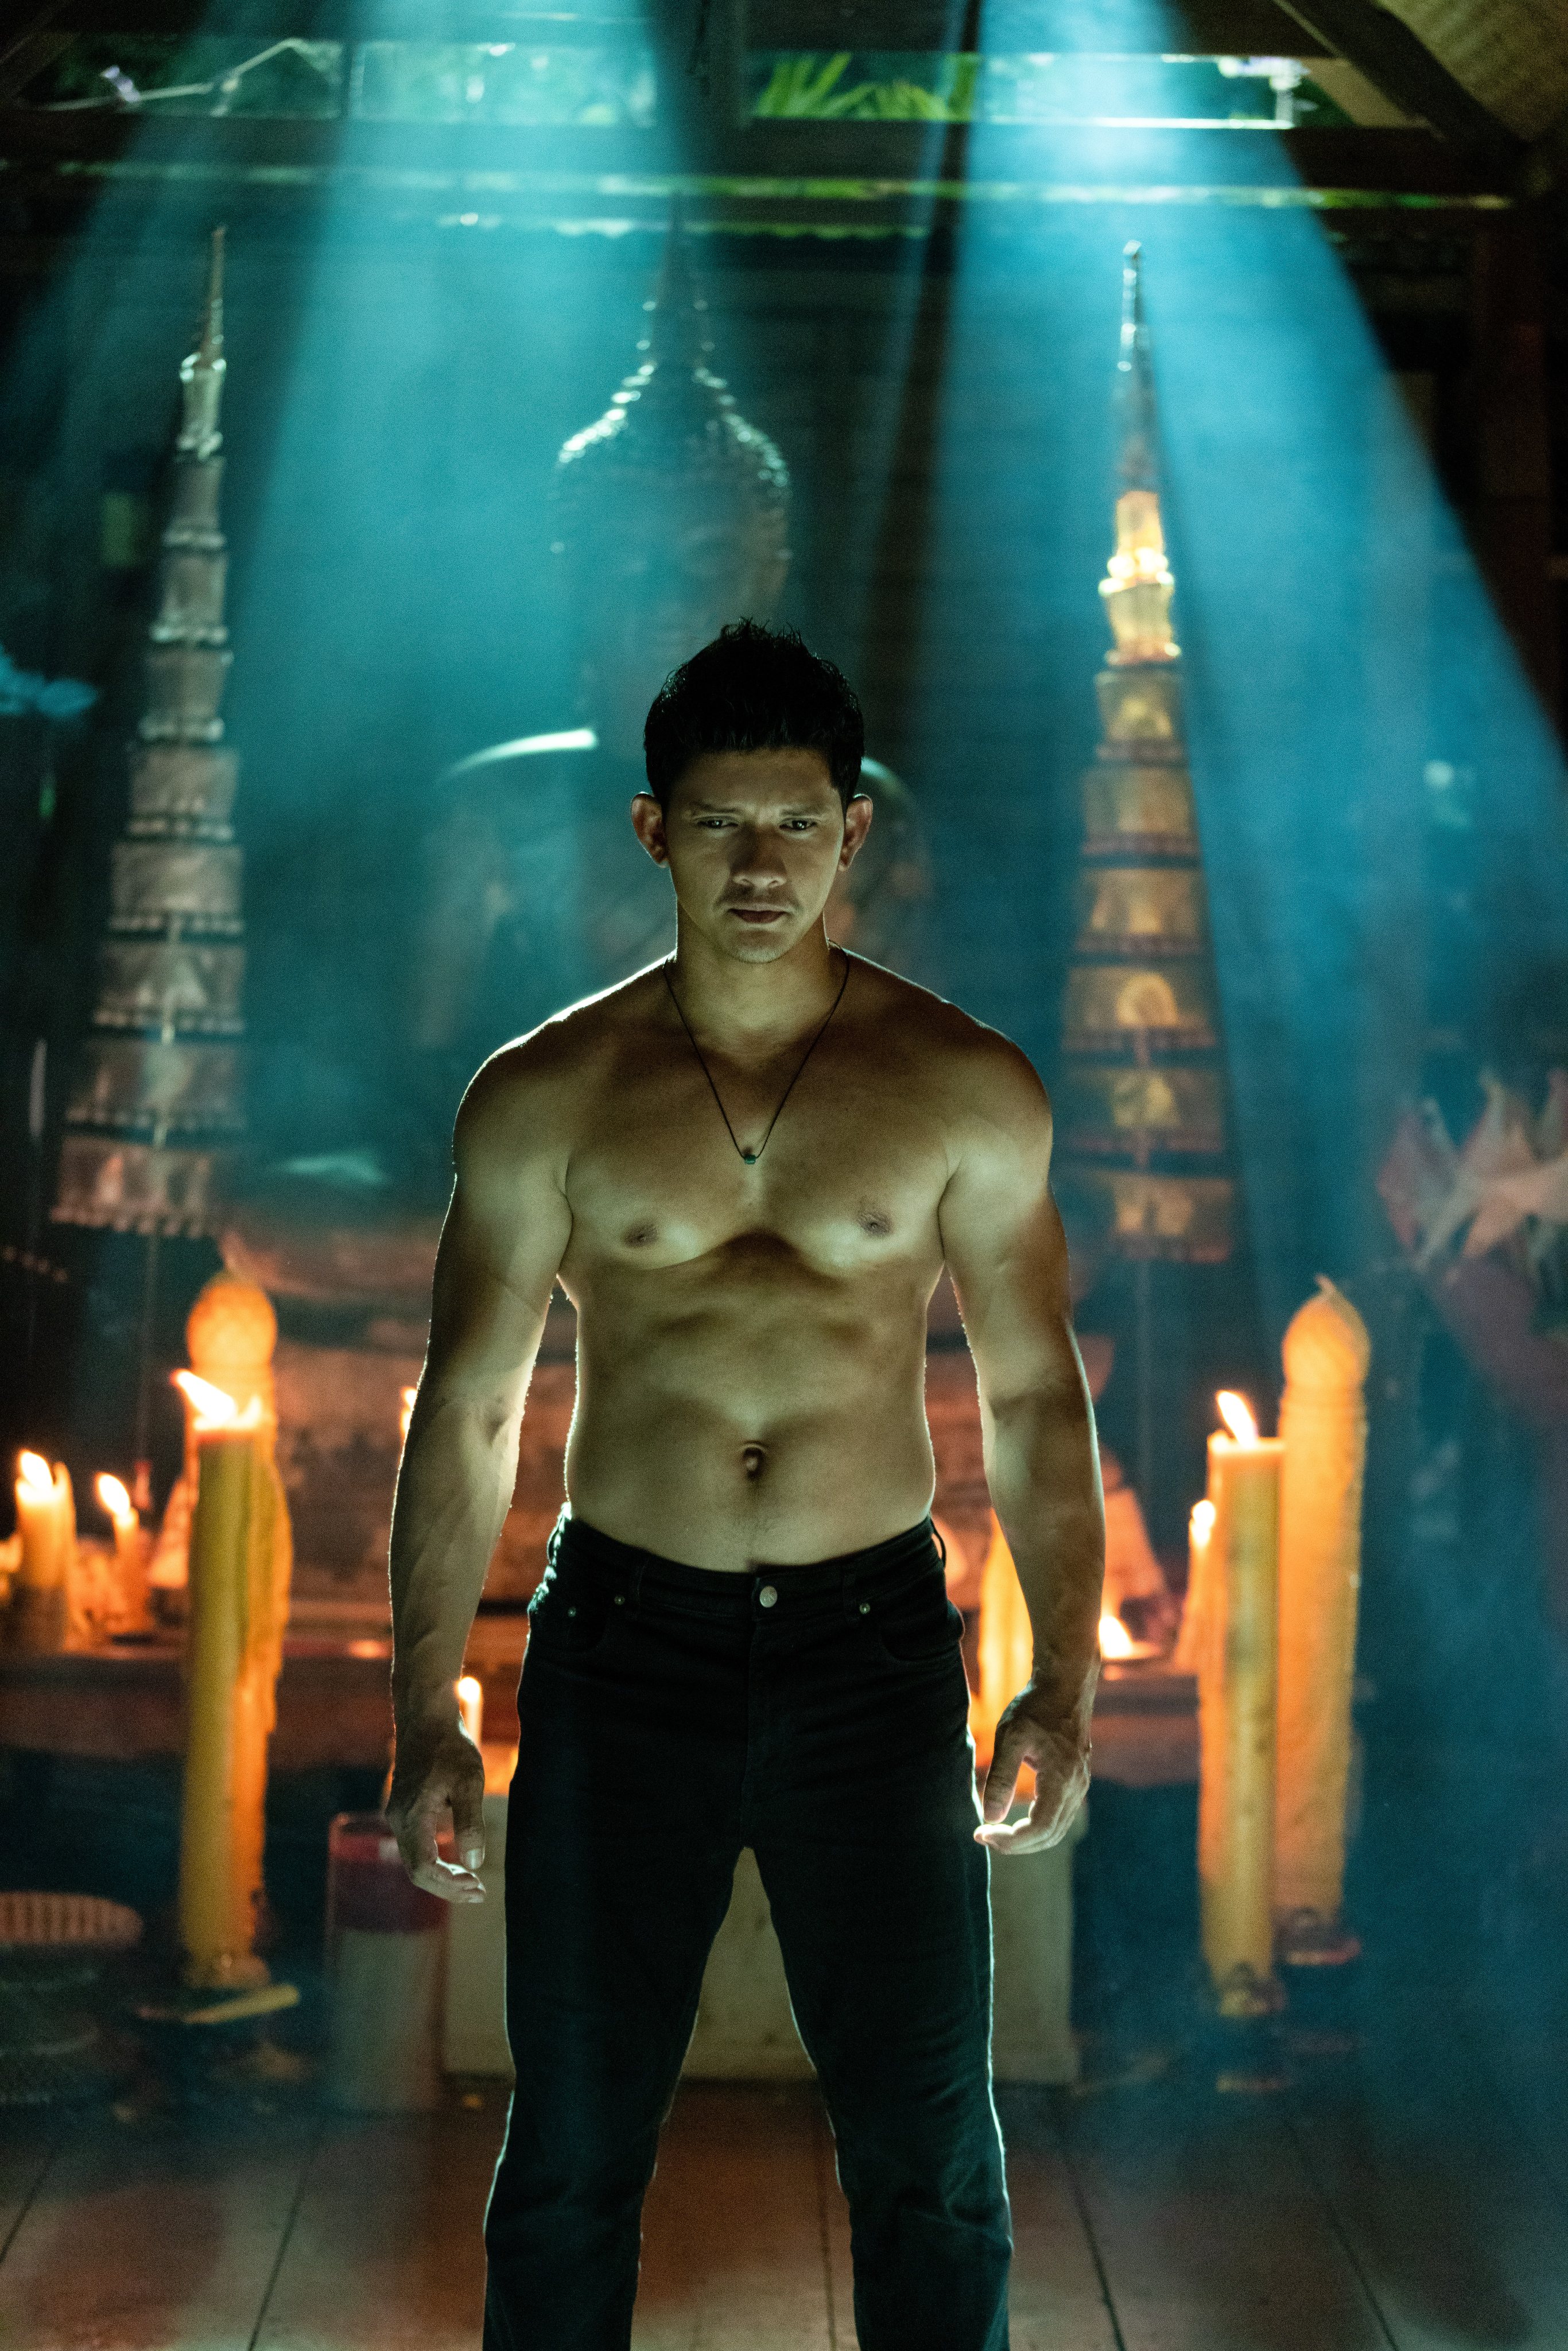 Indonesian martial arts star Iko Uwais has been accused of assaulting his interior designer, a charge which he denied. Photo: Patrick Brown/Netflix